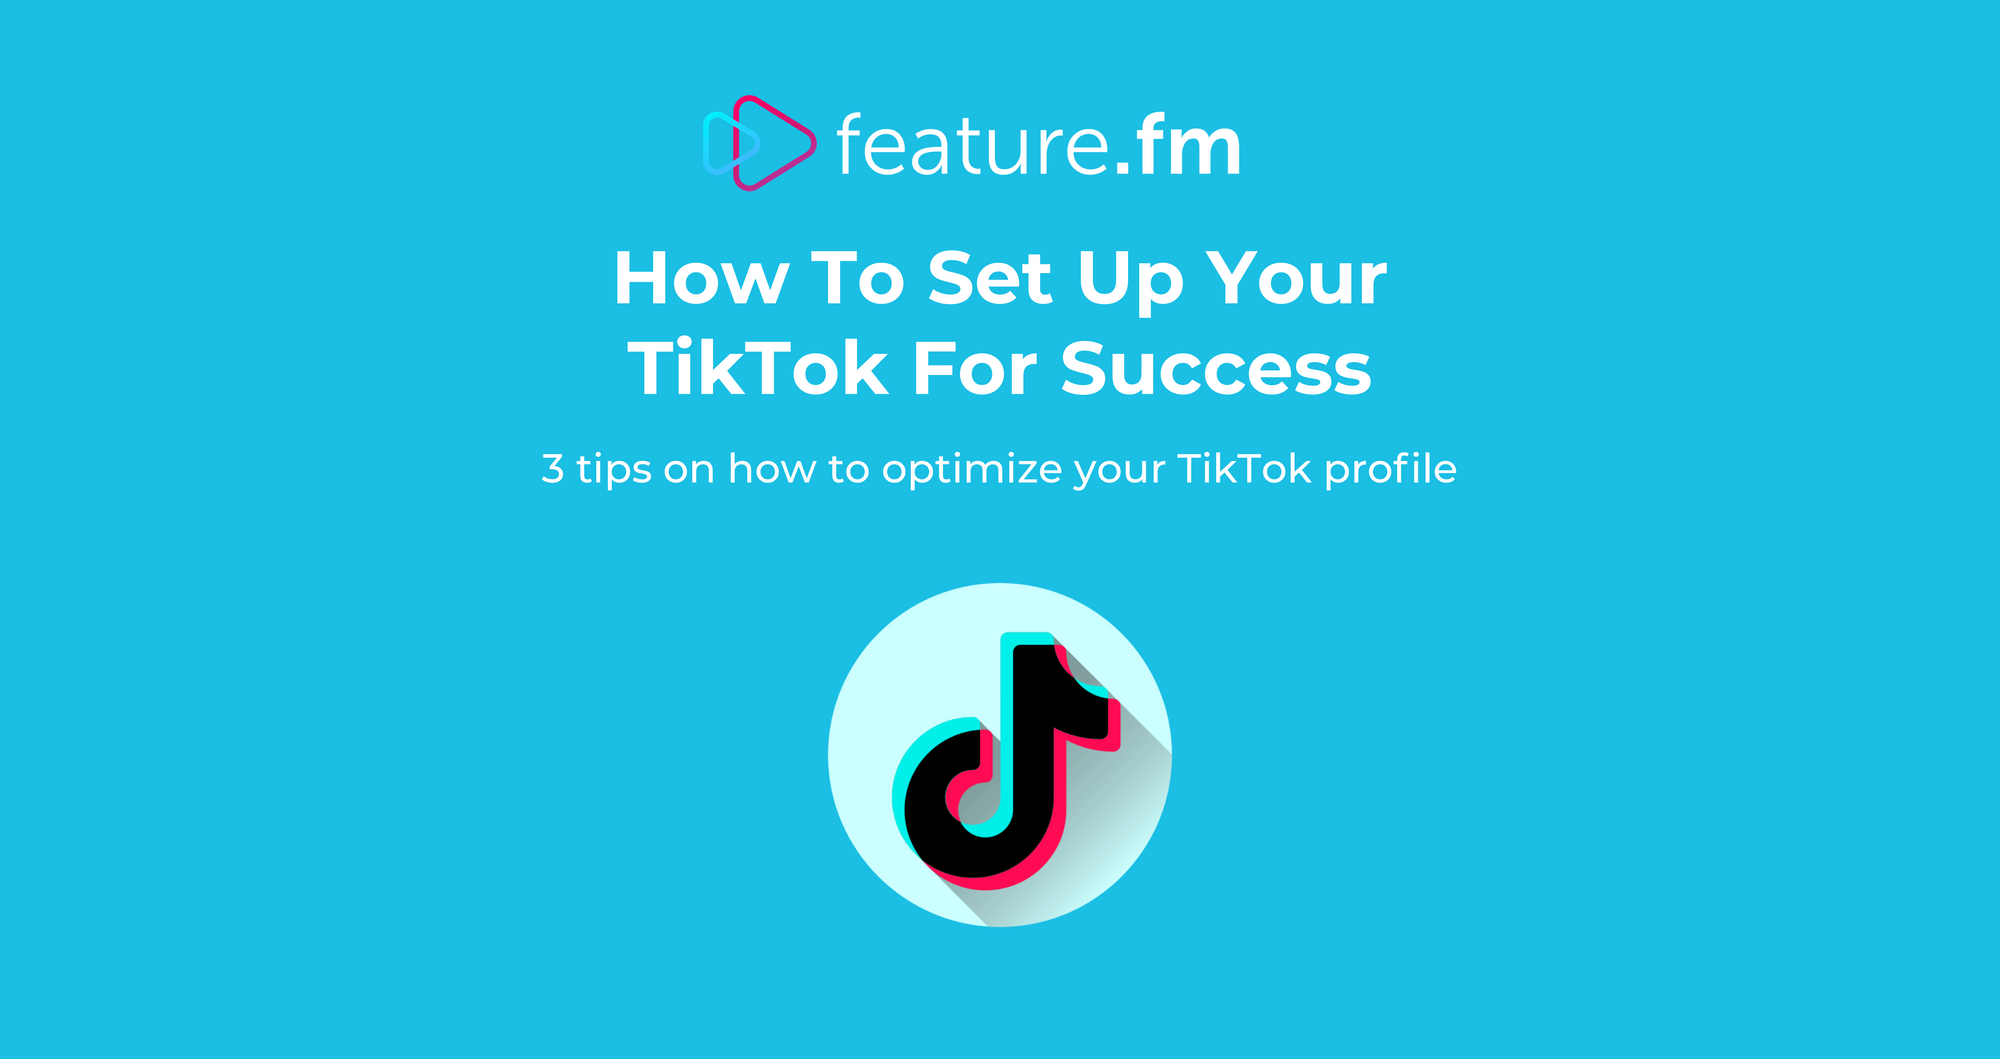 Day 12: How to set up your TikTok profile for success